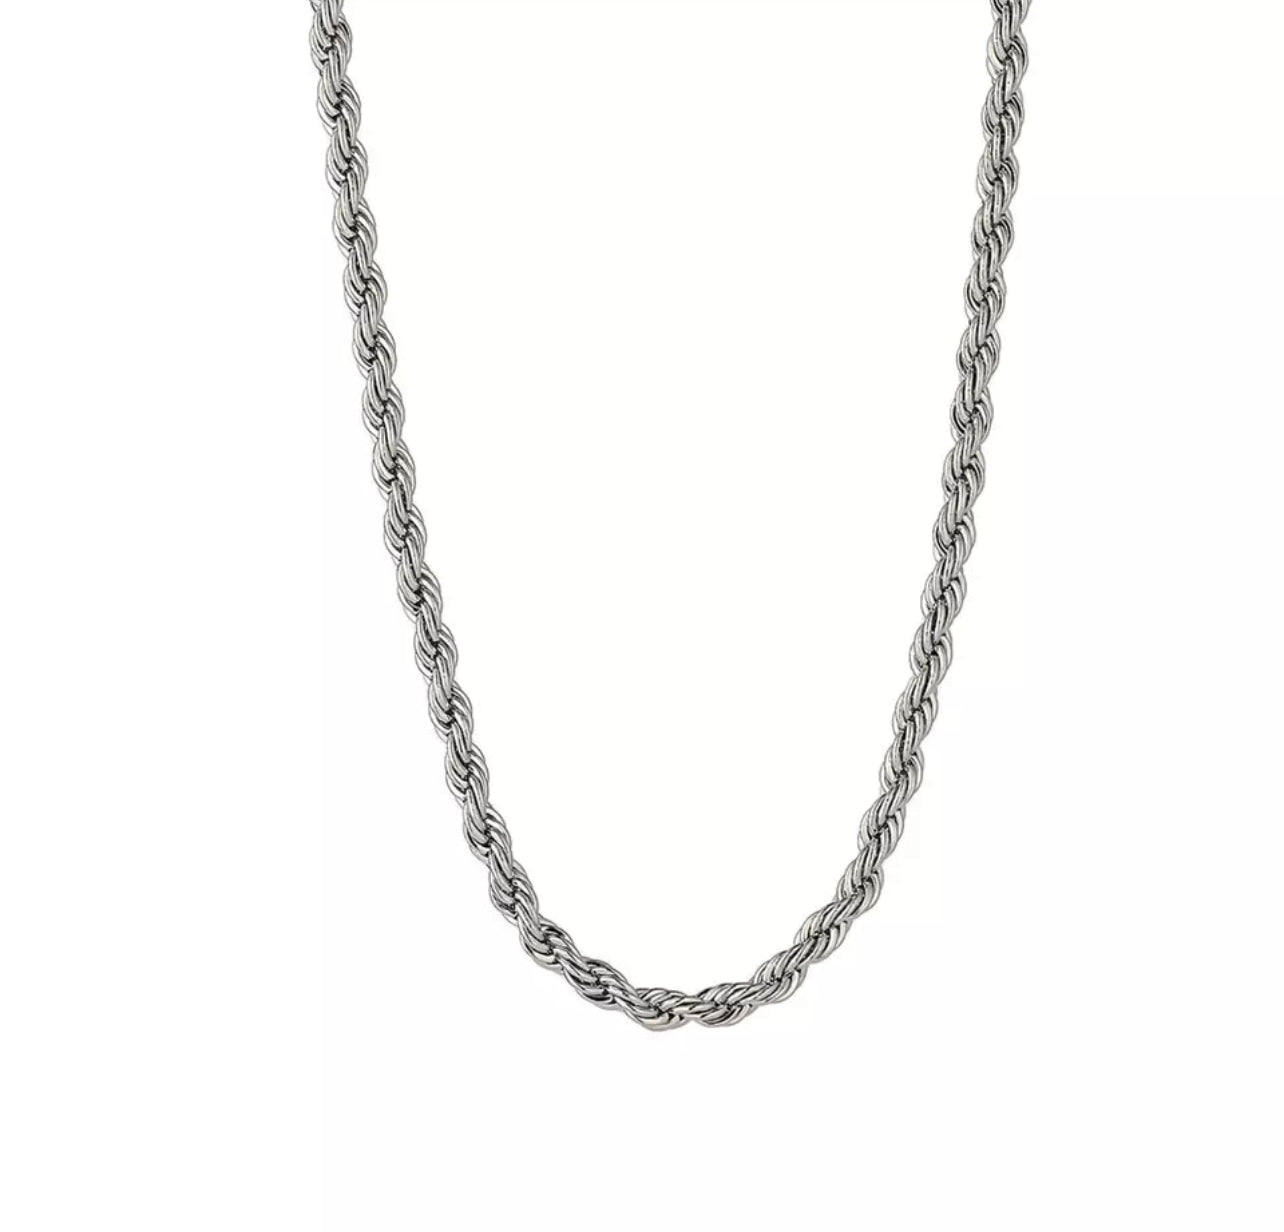 Thin Rope Necklace, Silver Chains for Women & Men